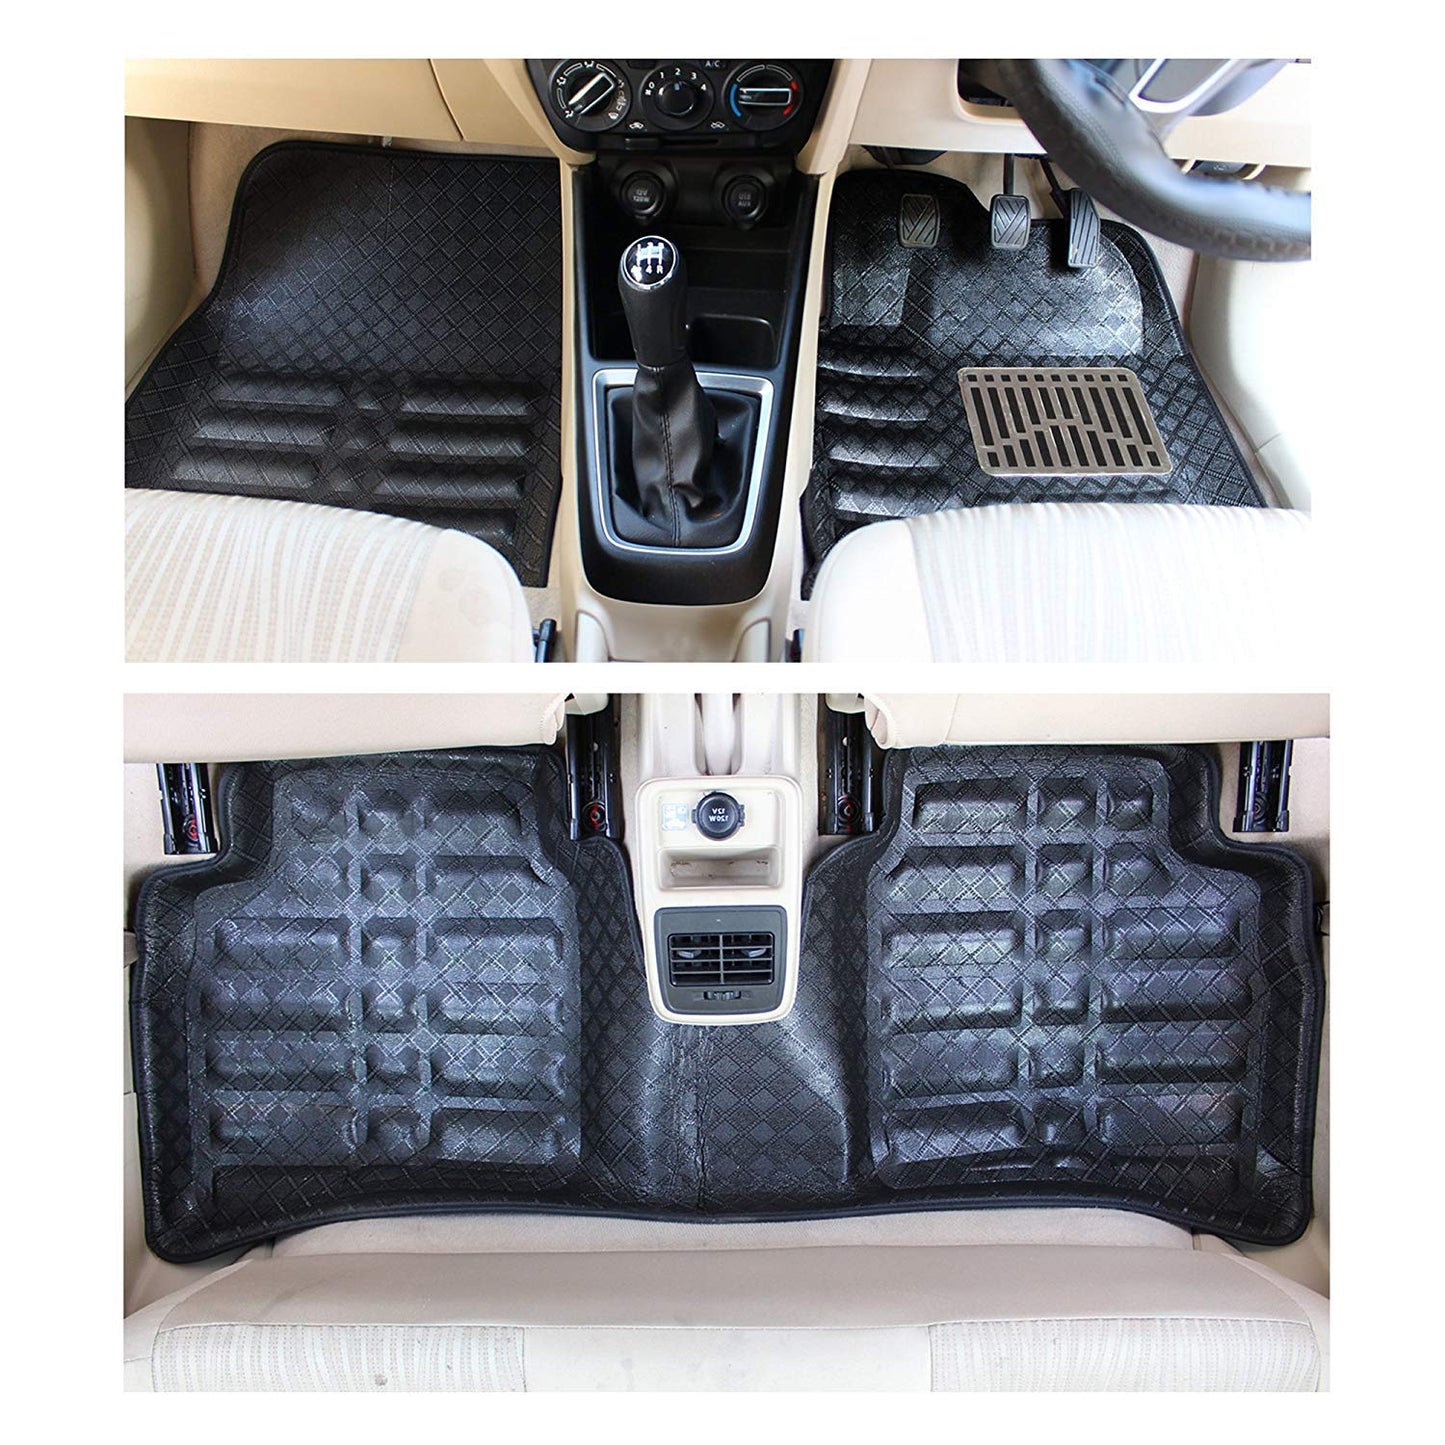 Oshotto 4D Artificial Leather Car Floor Mats For Ford Ecosports - Set of 3 (2 pcs Front & one Long Single Rear pc) - Black